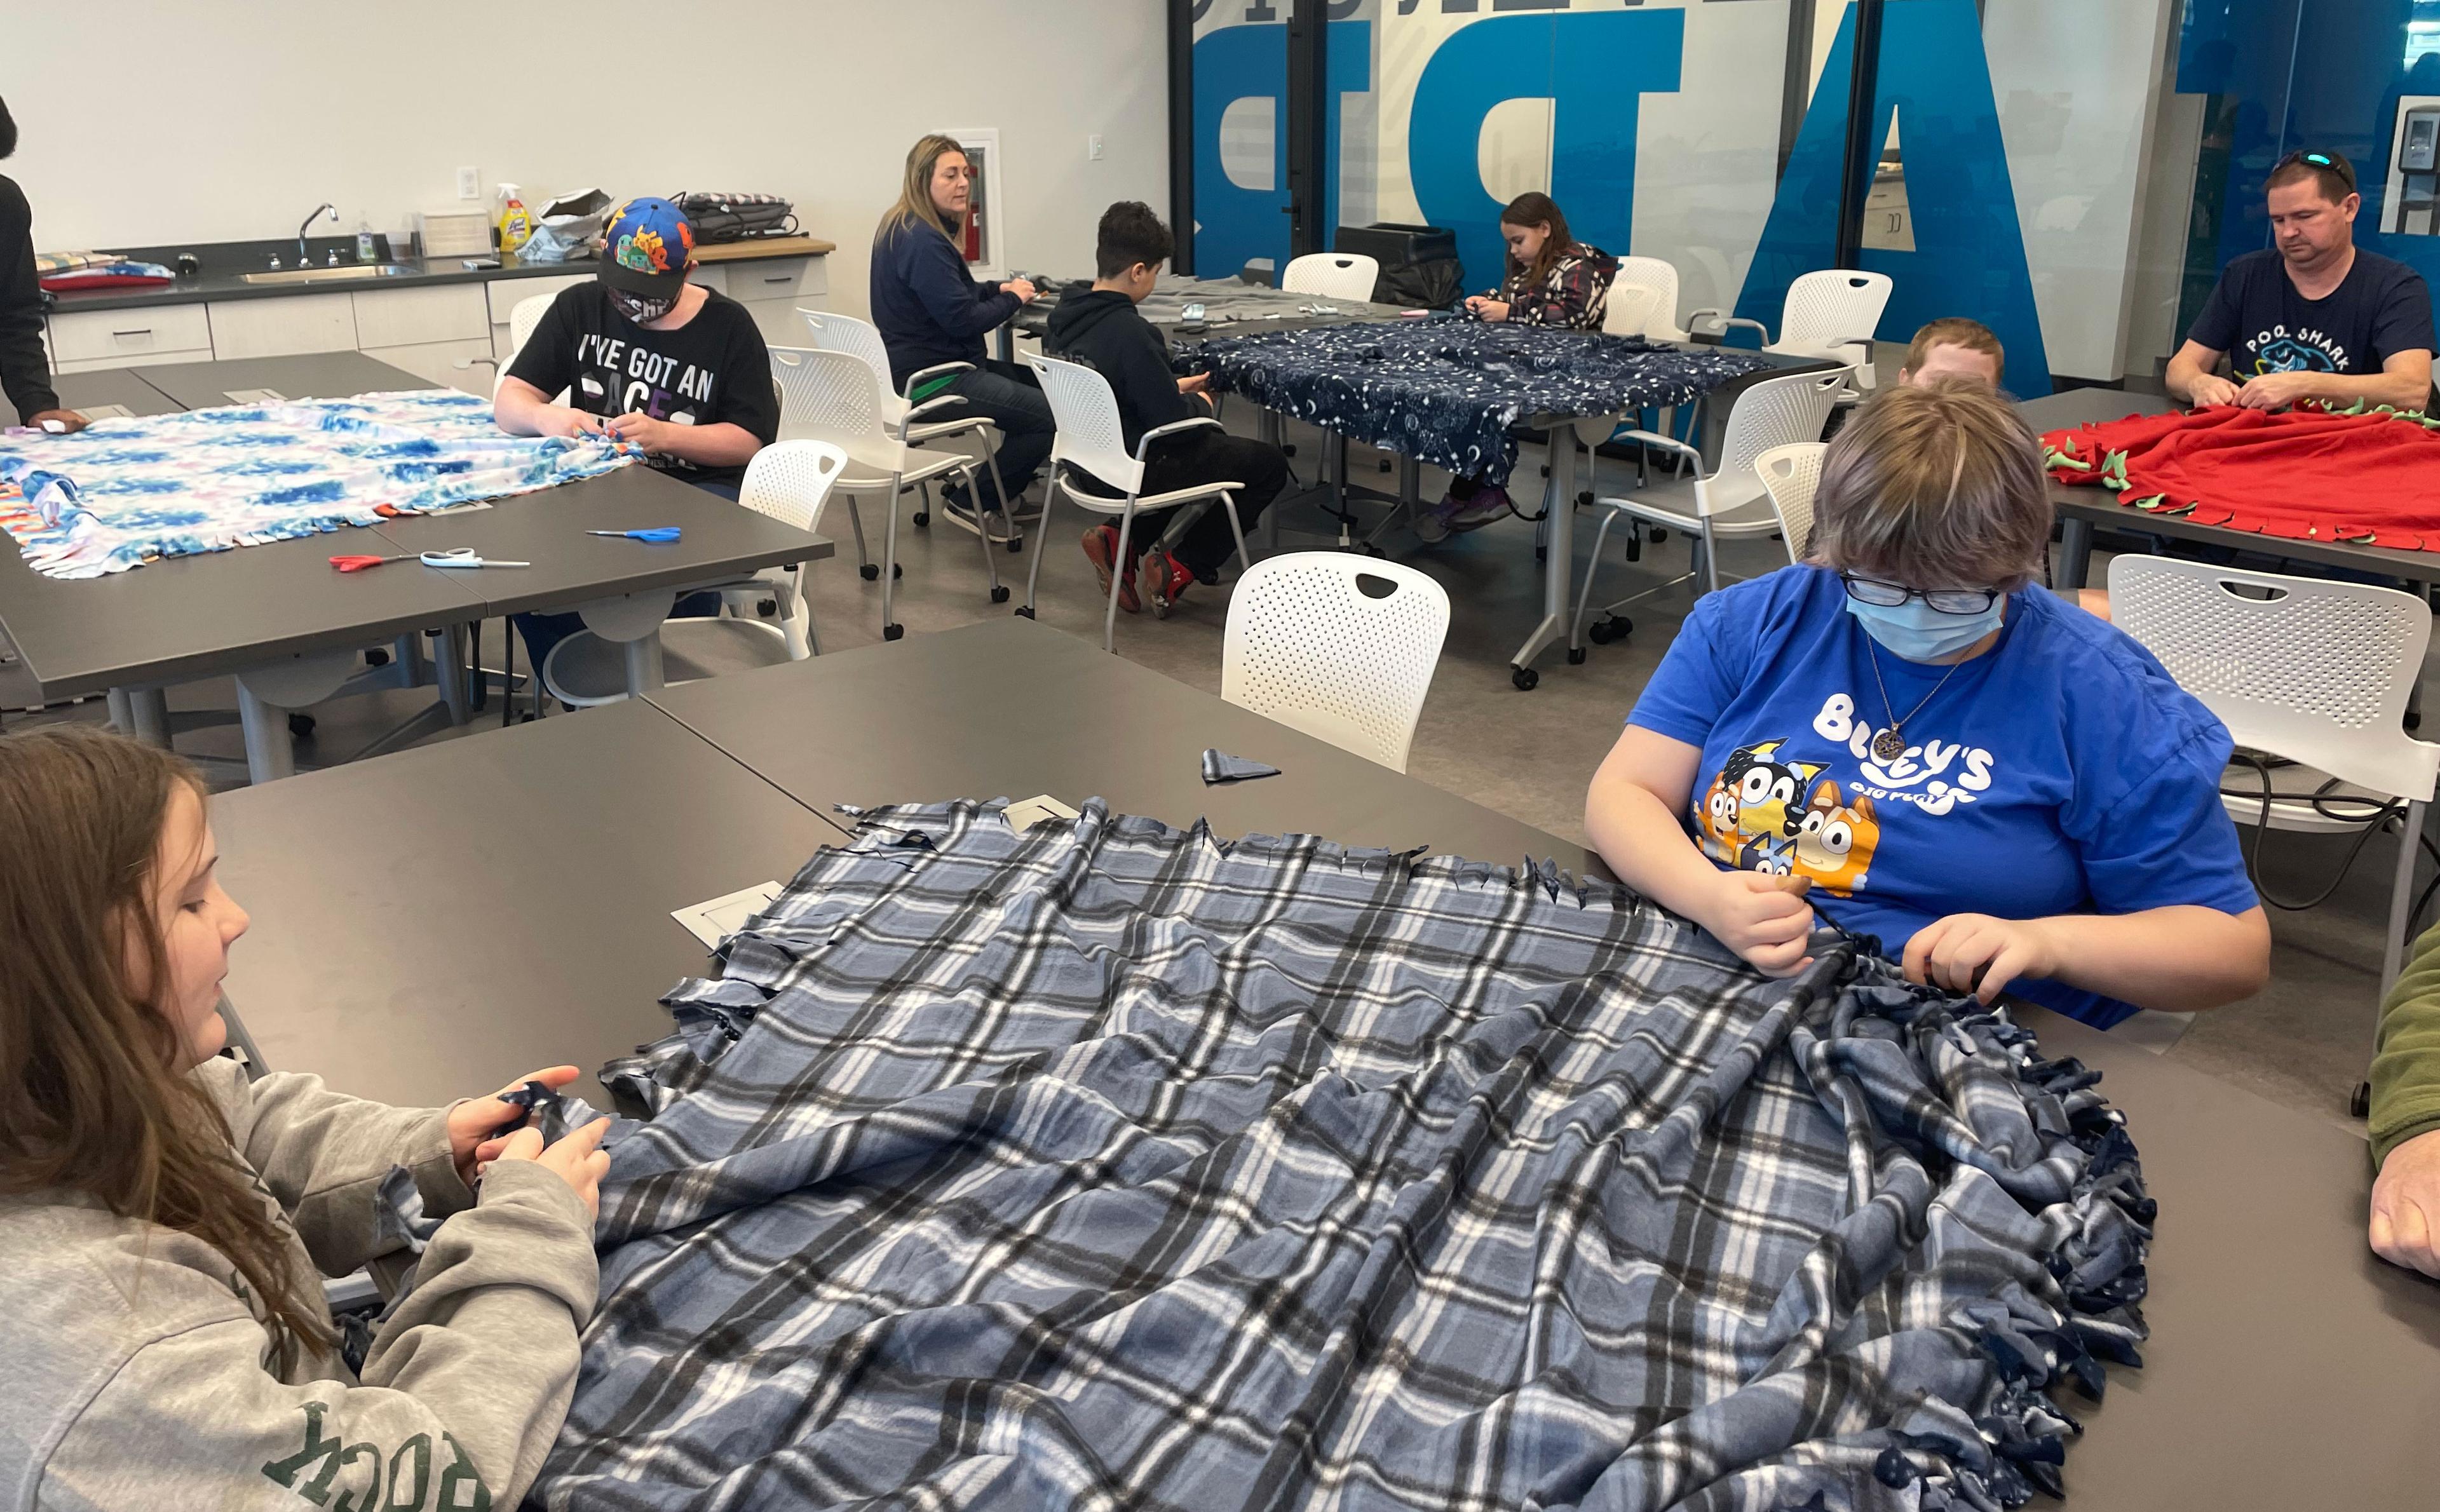 Students work on no-sew blankets for a homeless shelter